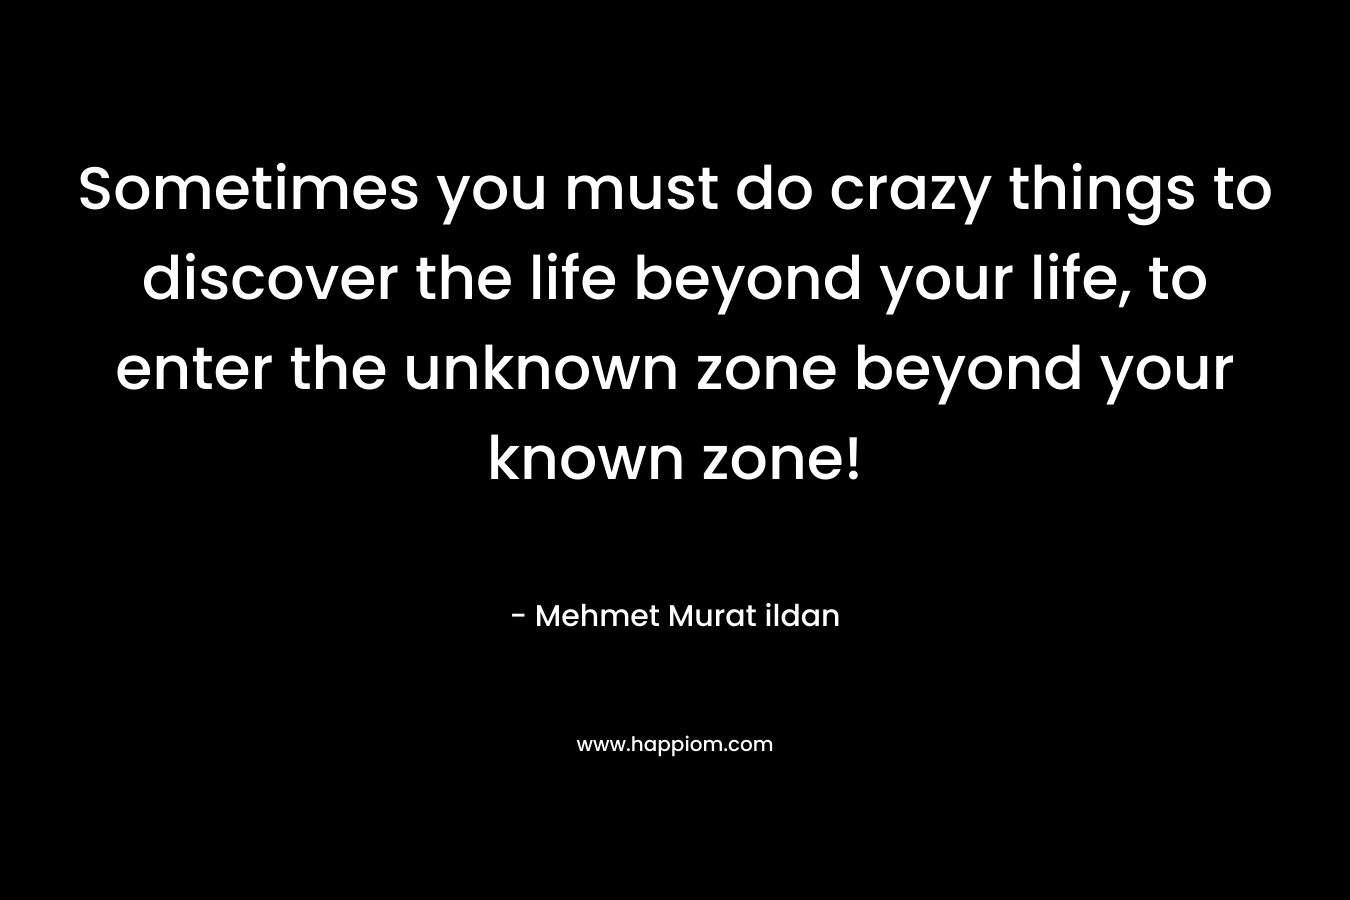 Sometimes you must do crazy things to discover the life beyond your life, to enter the unknown zone beyond your known zone!